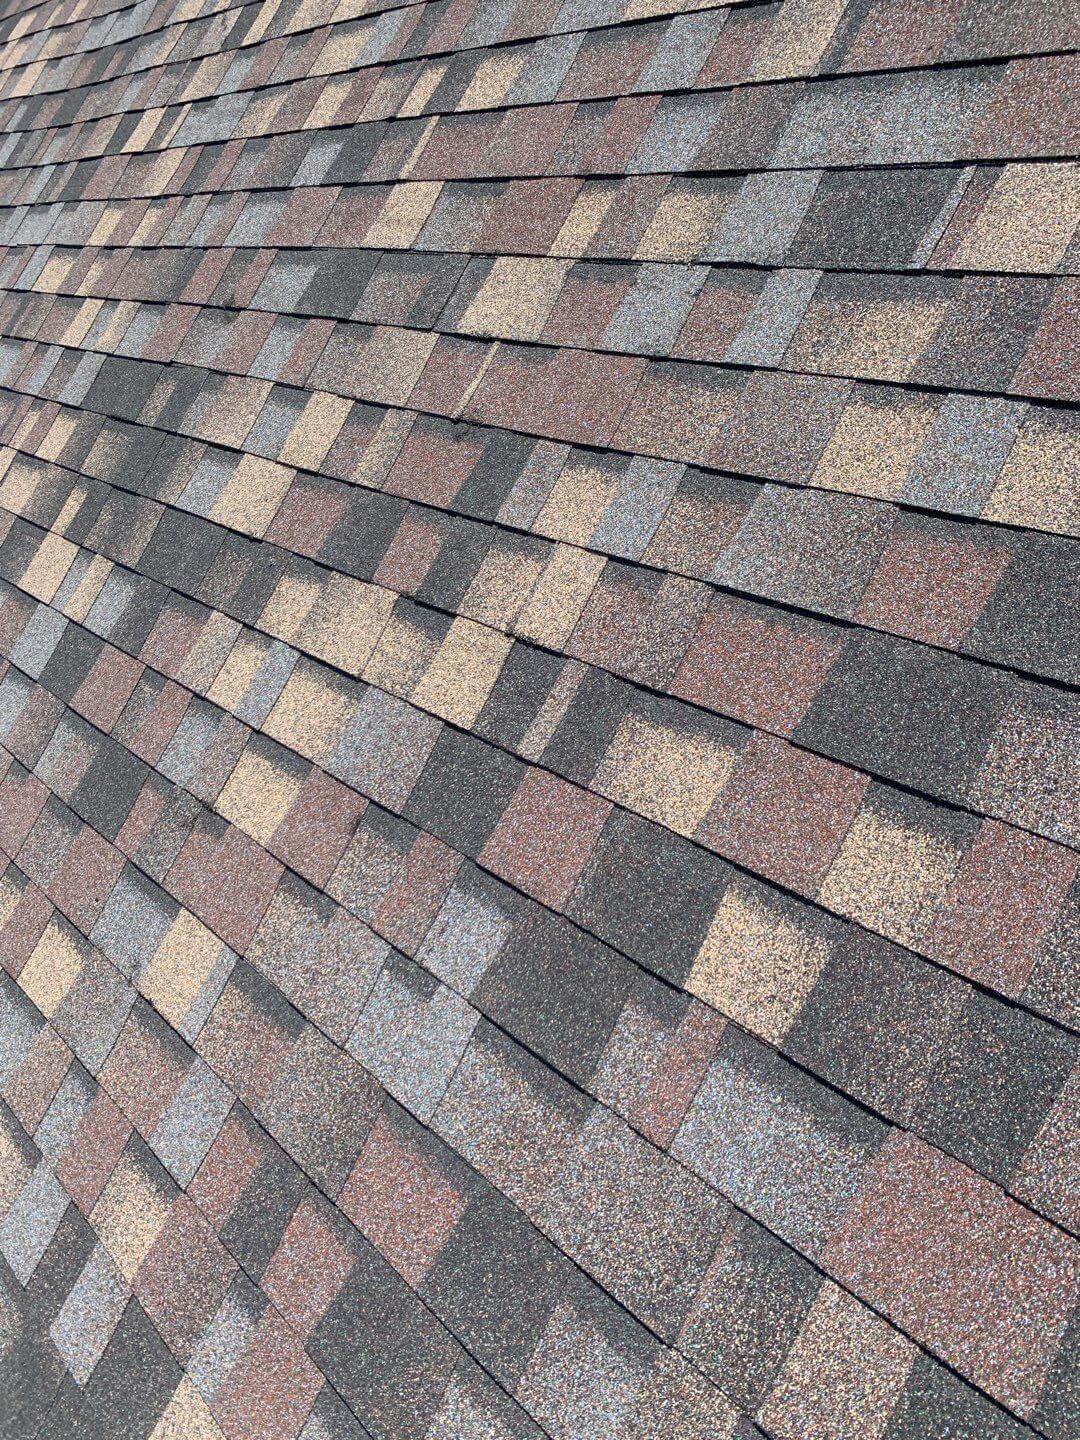 The biggest mistakes when choosing a roof color